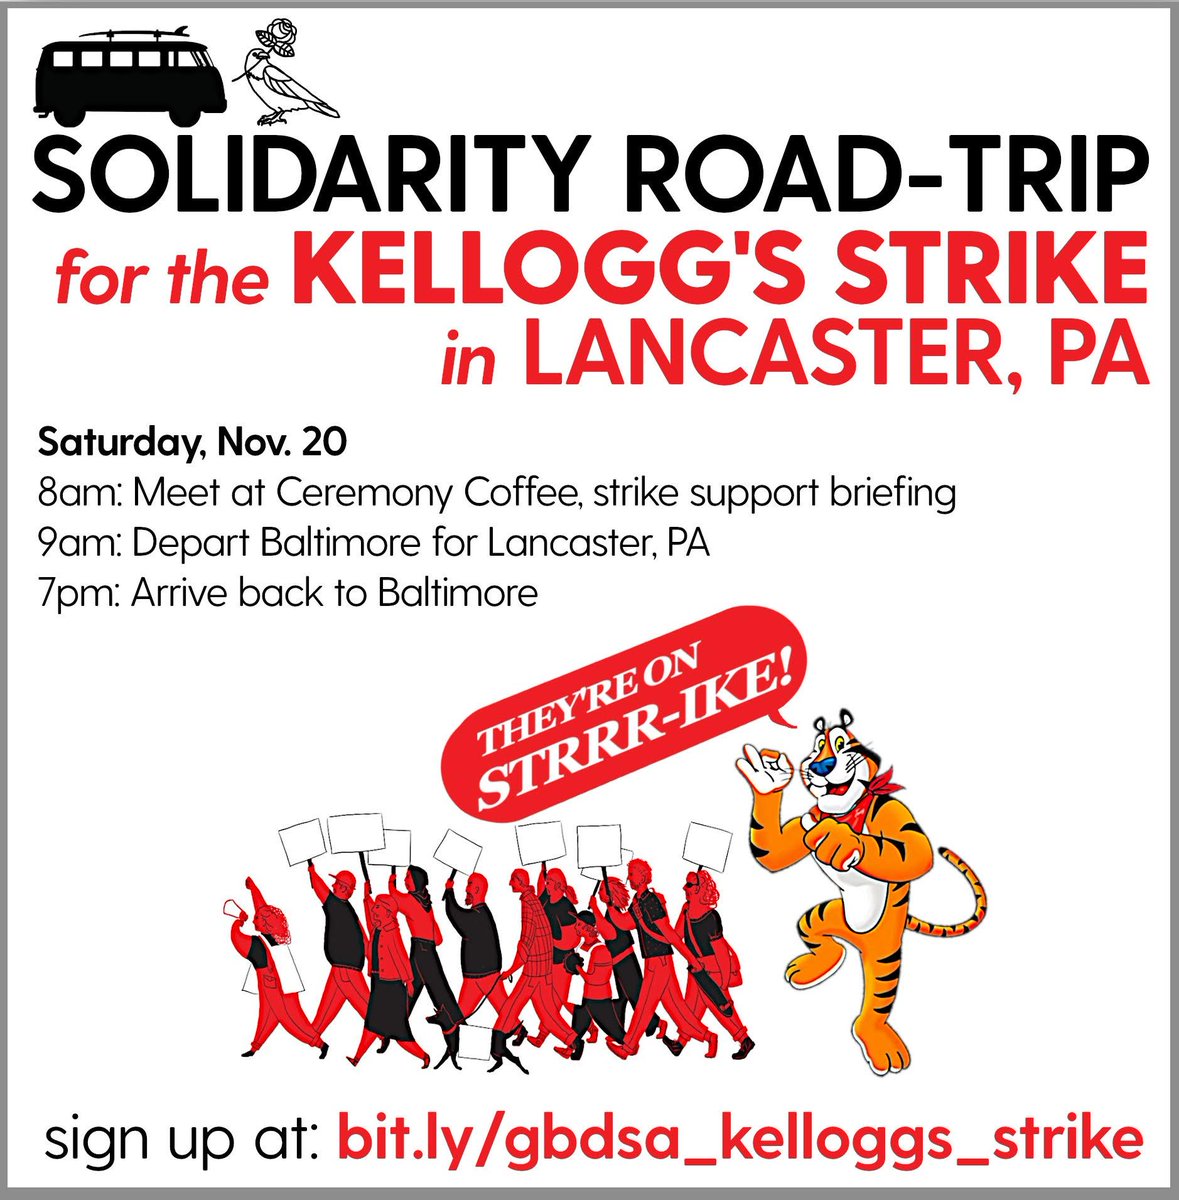 On Saturday November 20th, join @BaltimoreDsa for a carpool to Lancaster, PA to stand with @PhillyDSA on the picket line in solidarity with striking @lancbctgm374g Kellogg's workers. RSVP at bit.ly/gbdsa_kelloggs… #Striketober #Strikesgiving #strikesgiving #1u